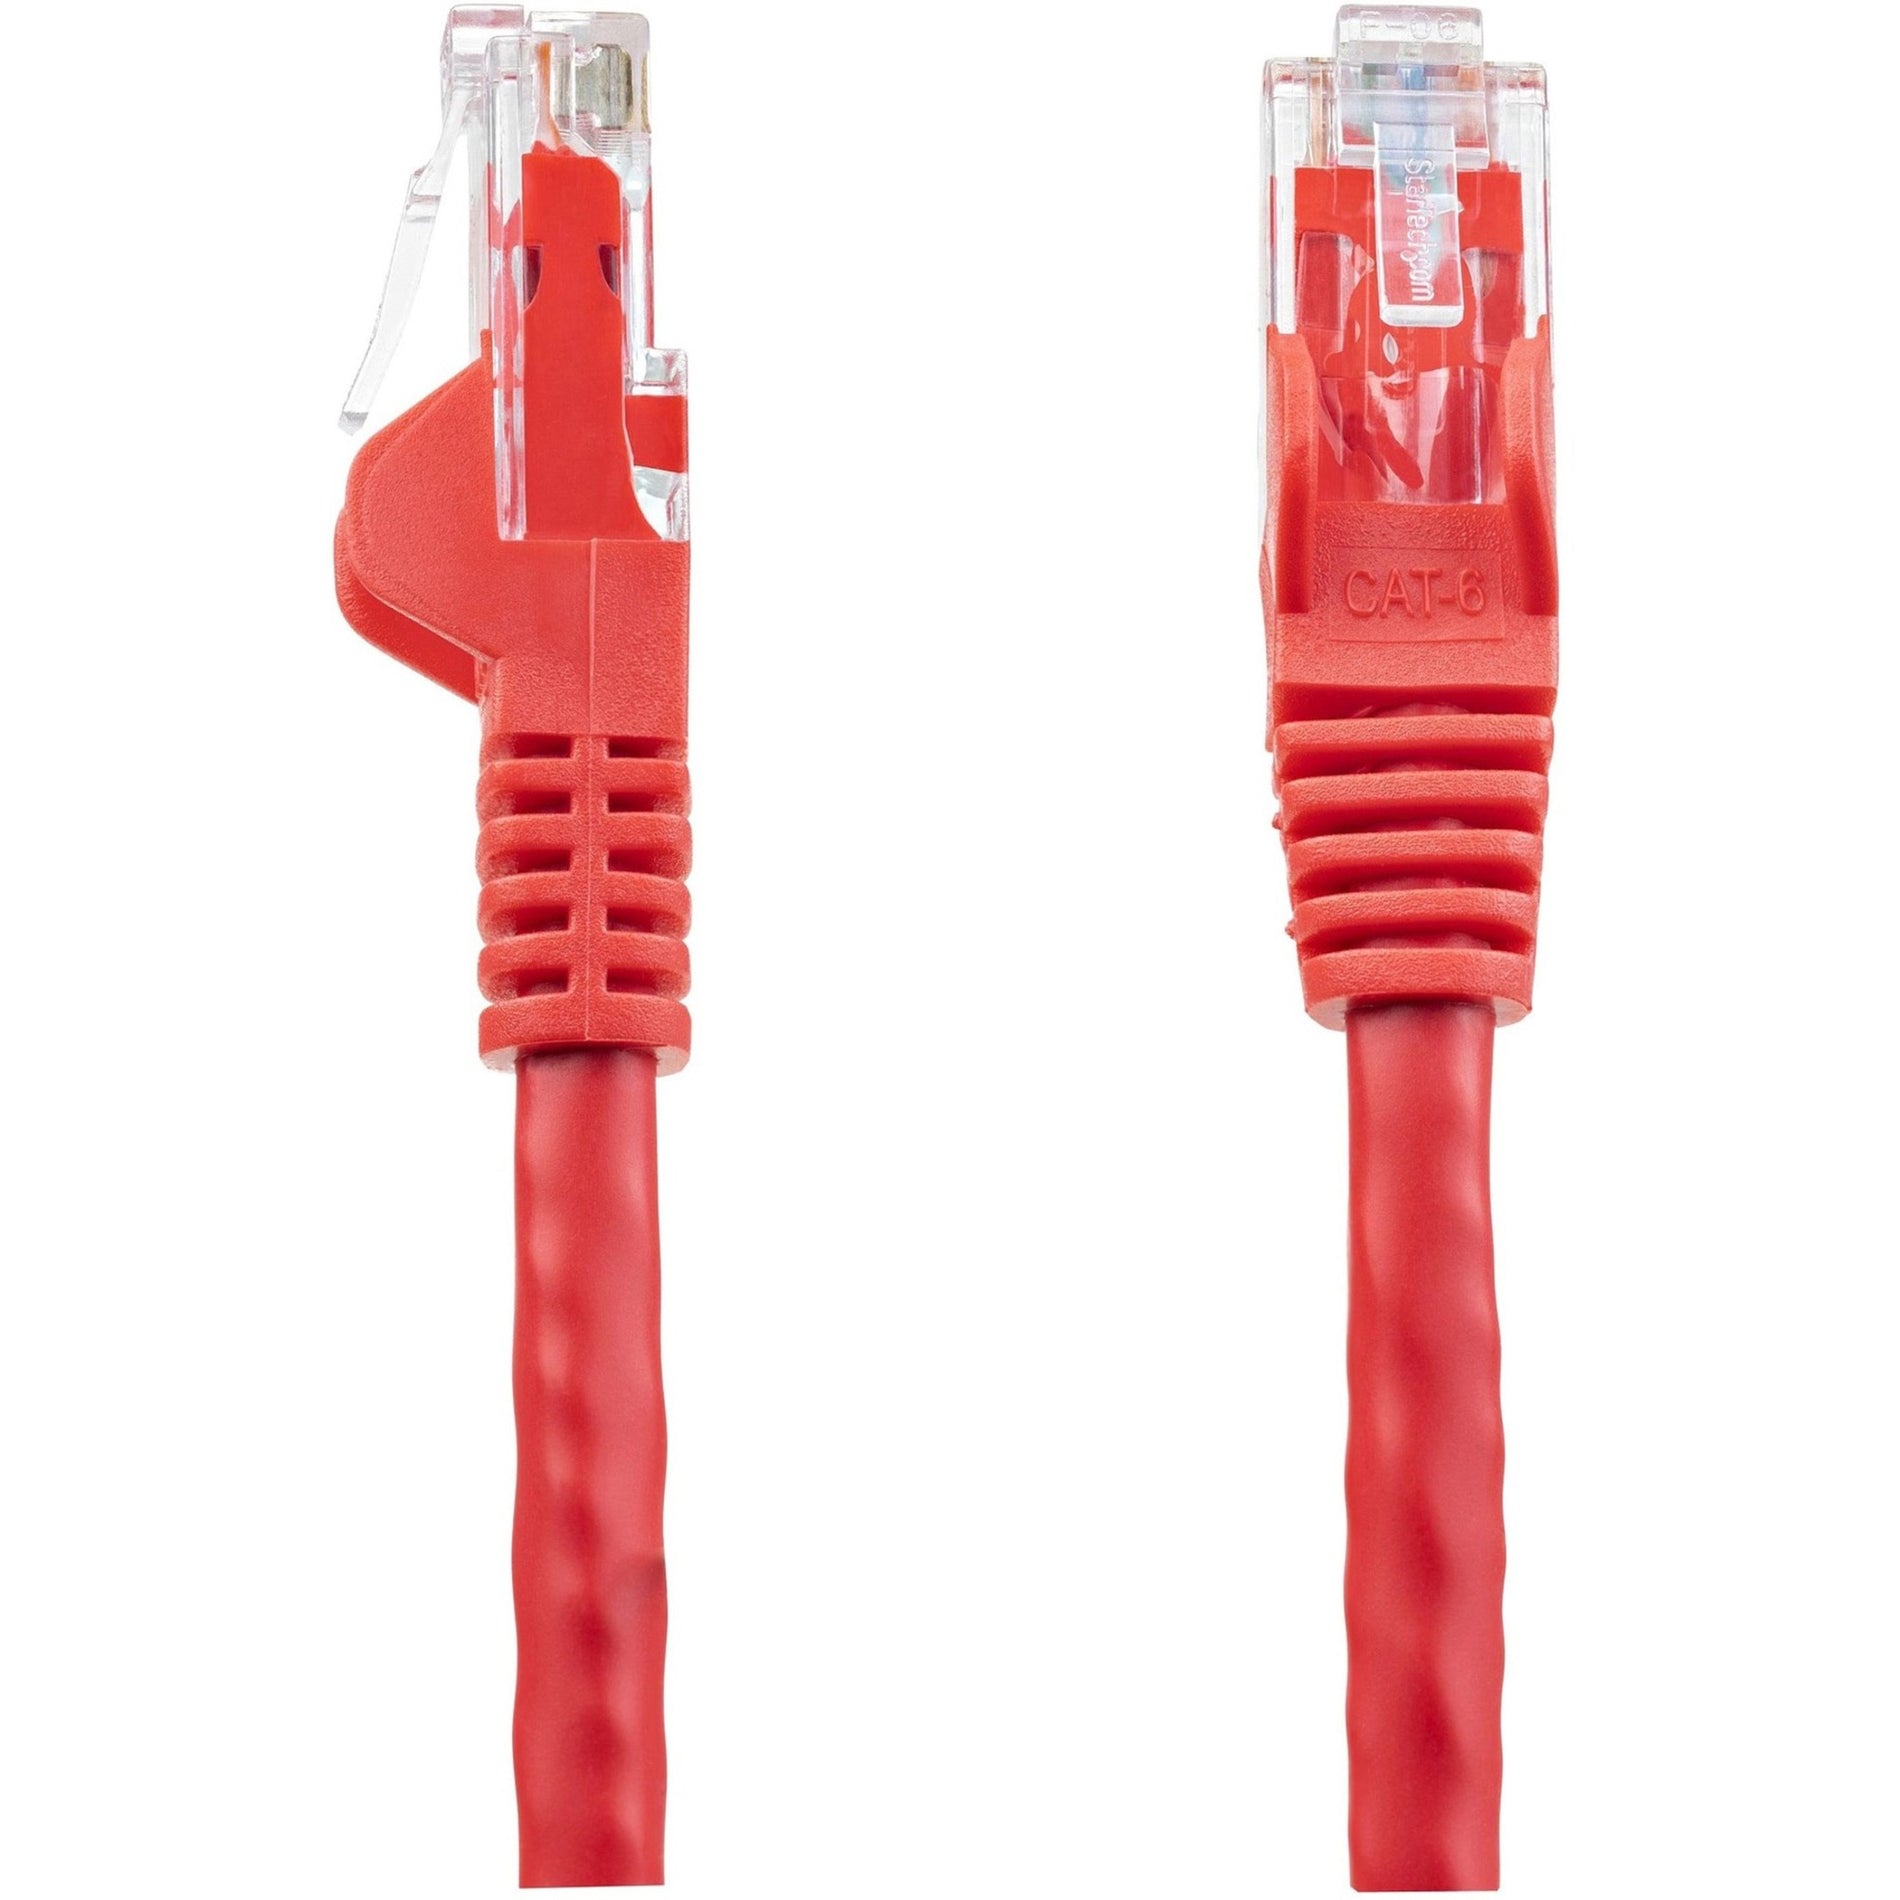 StarTech.com N6PATCH10RD 10 ft Red Snagless Cat6 UTP Patch Cable, Molded, 10 Gbit/s Data Transfer Rate, Gold Plated Connectors